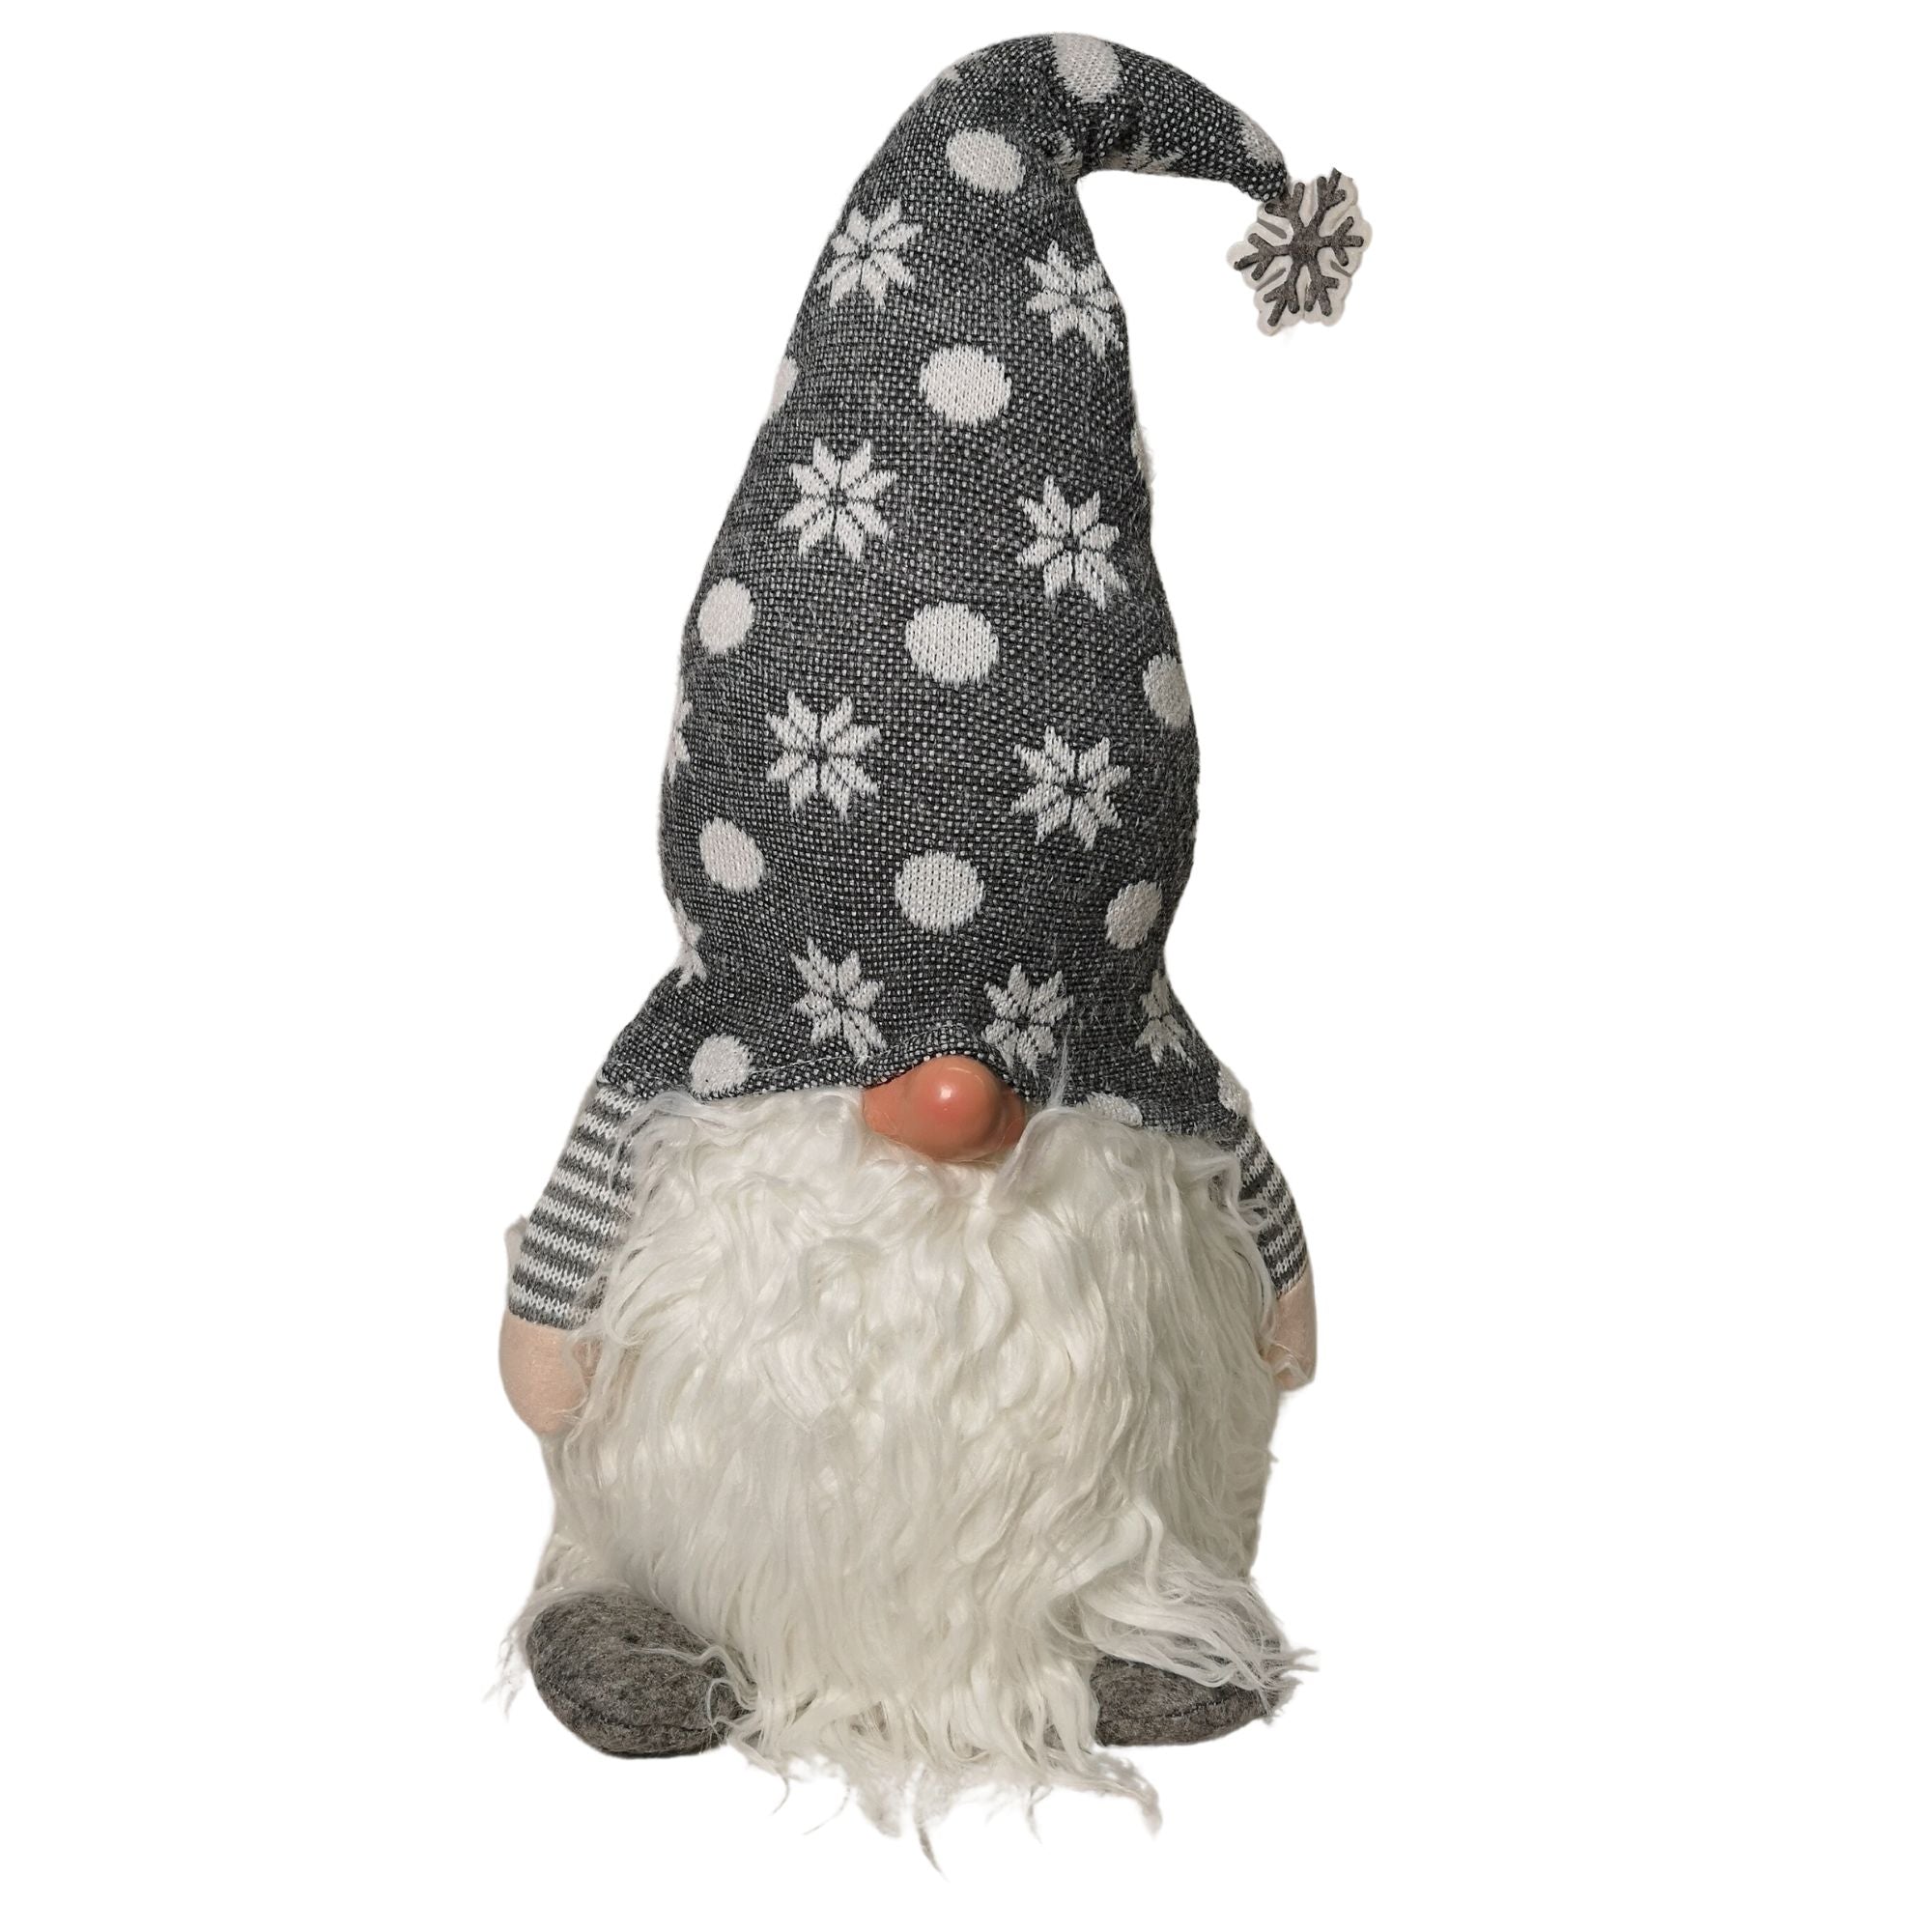 56cm Battery Operated Light up Christmas Standing Gonk Decoration in Grey